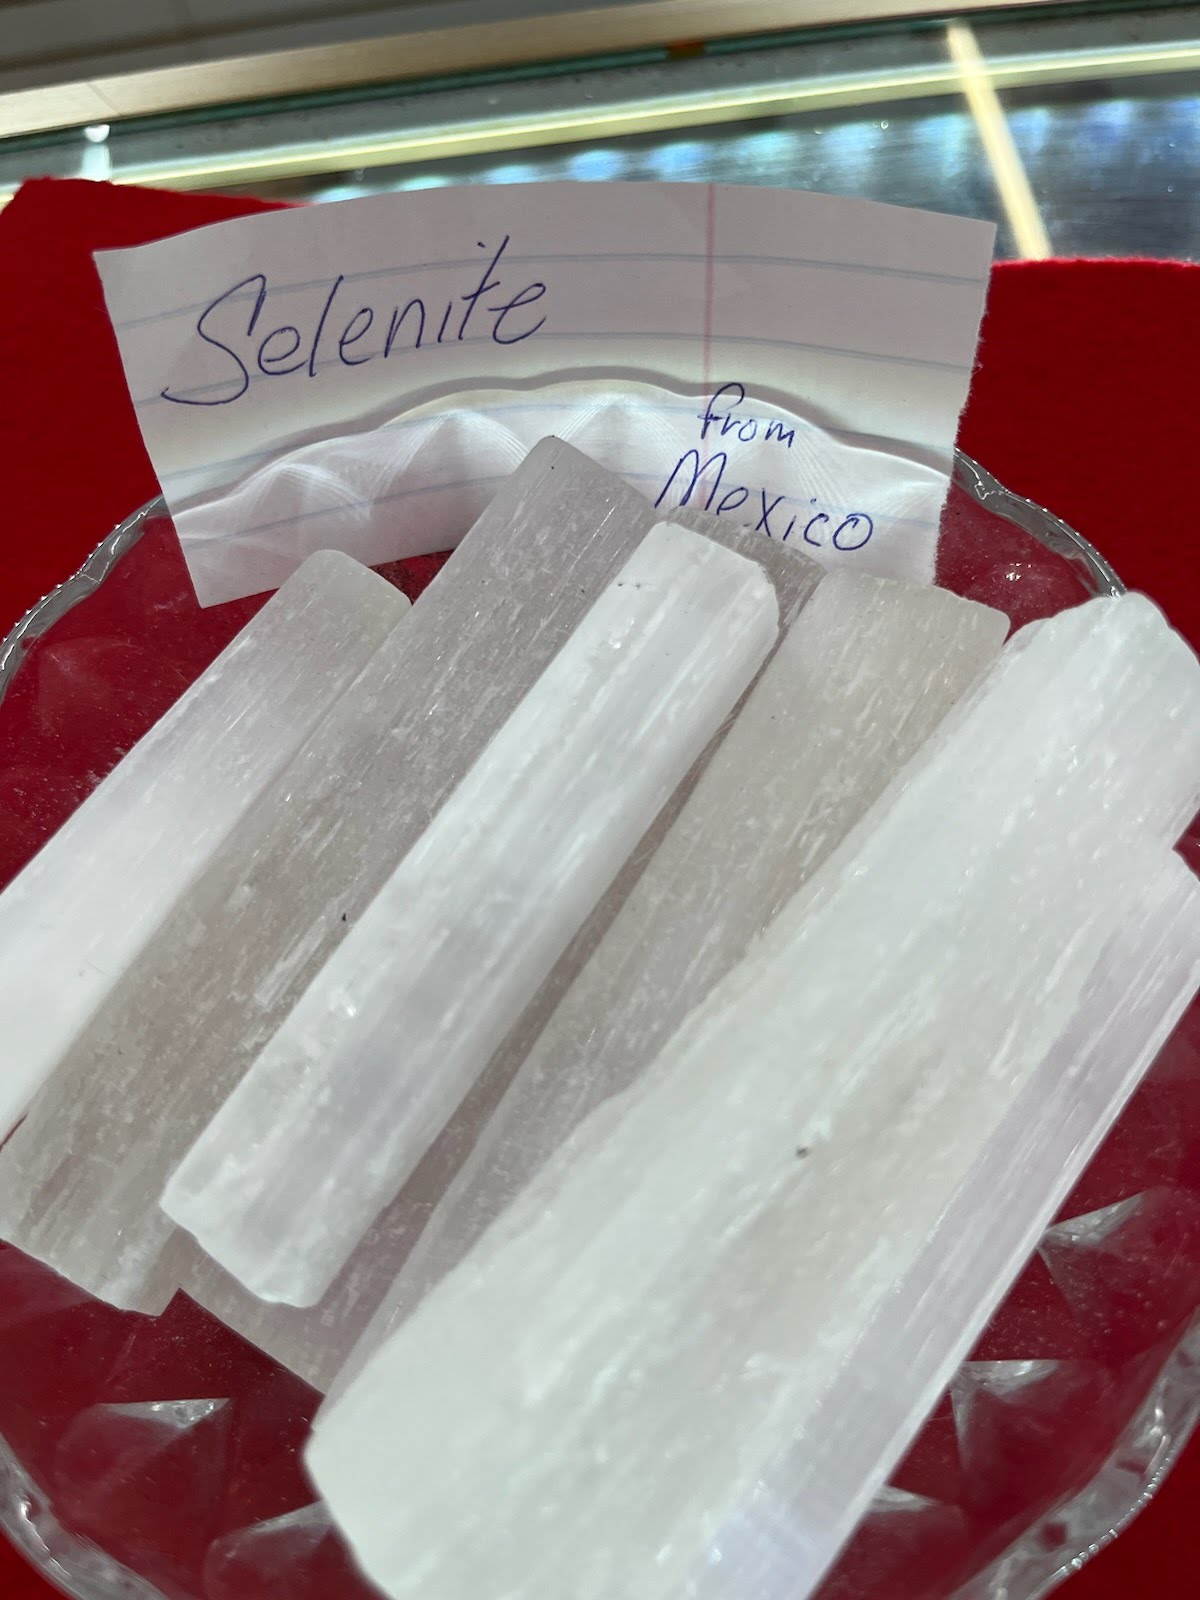 Selenite sticks are sitting on a plate.